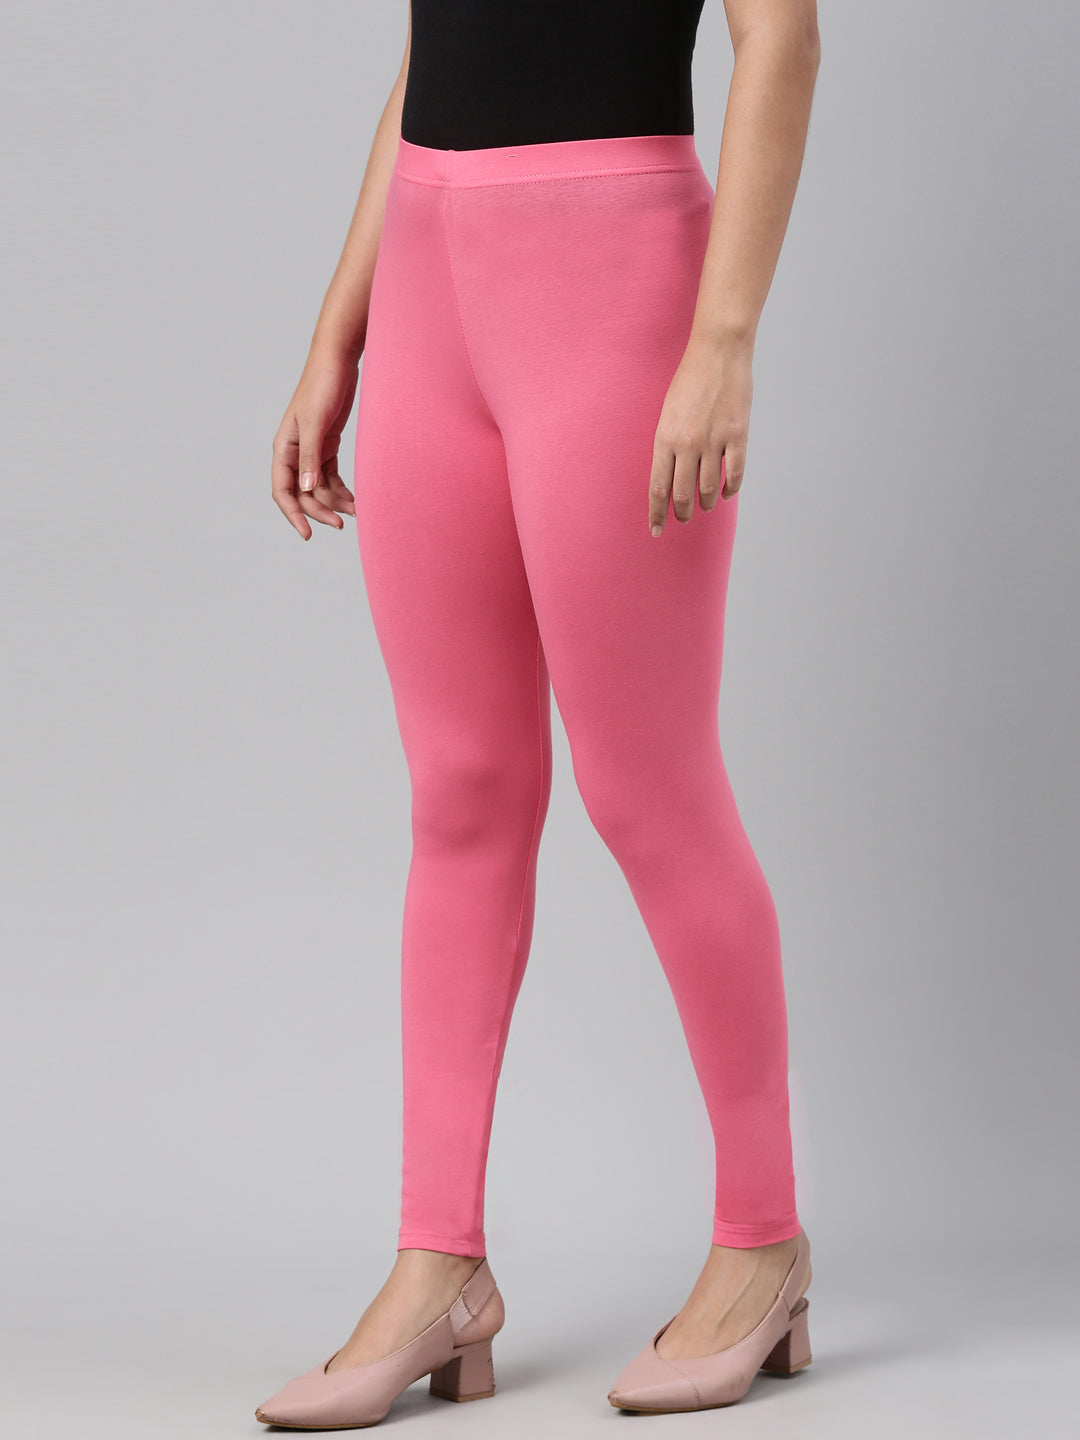 Ankle Length girls and Ladies Leggings, Casual Wear, Skin Fit at Rs 120 in  Ahmedabad